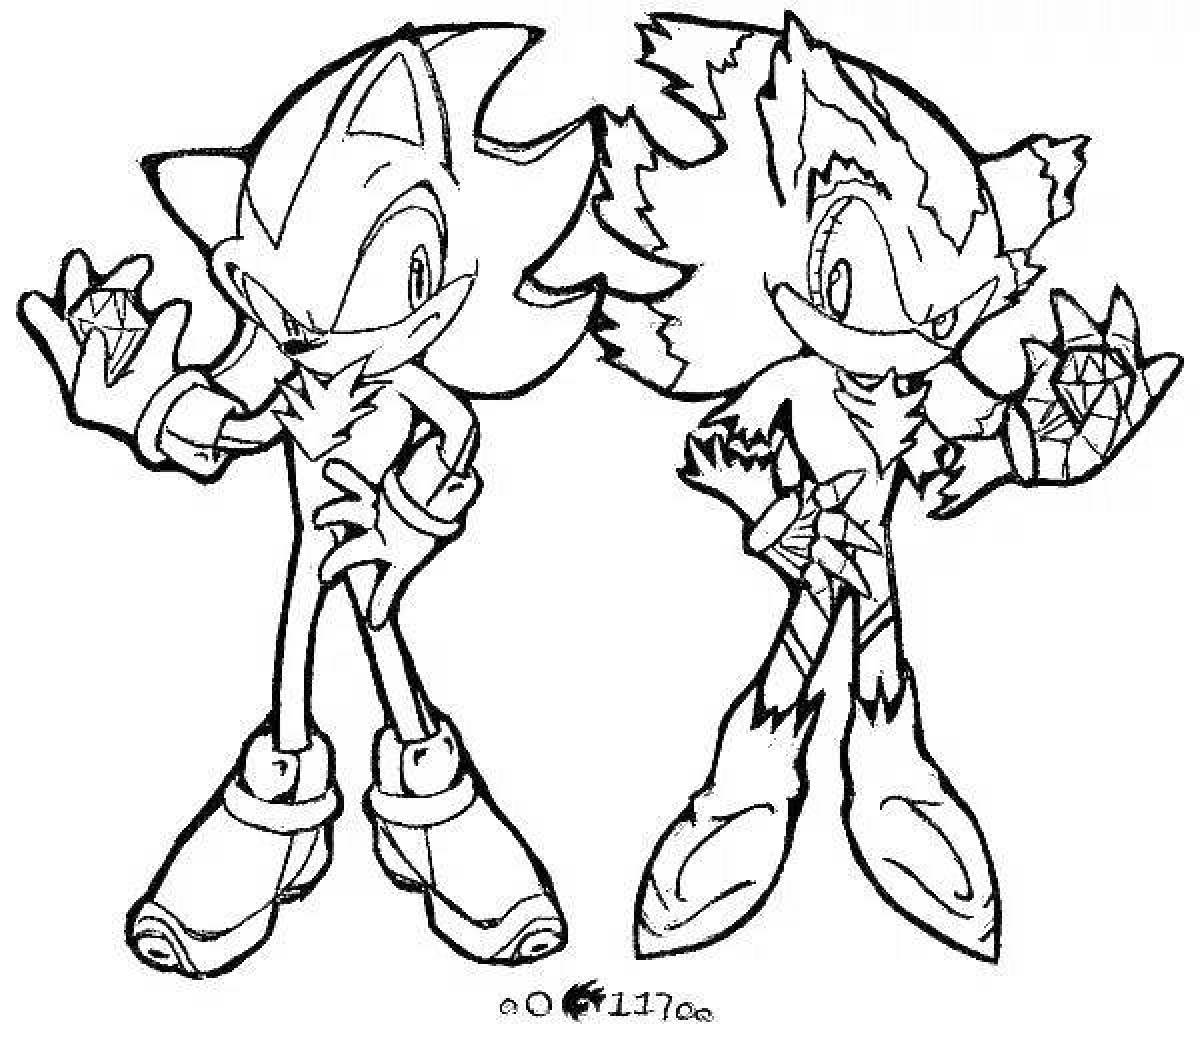 Charming sonic shadow coloring page